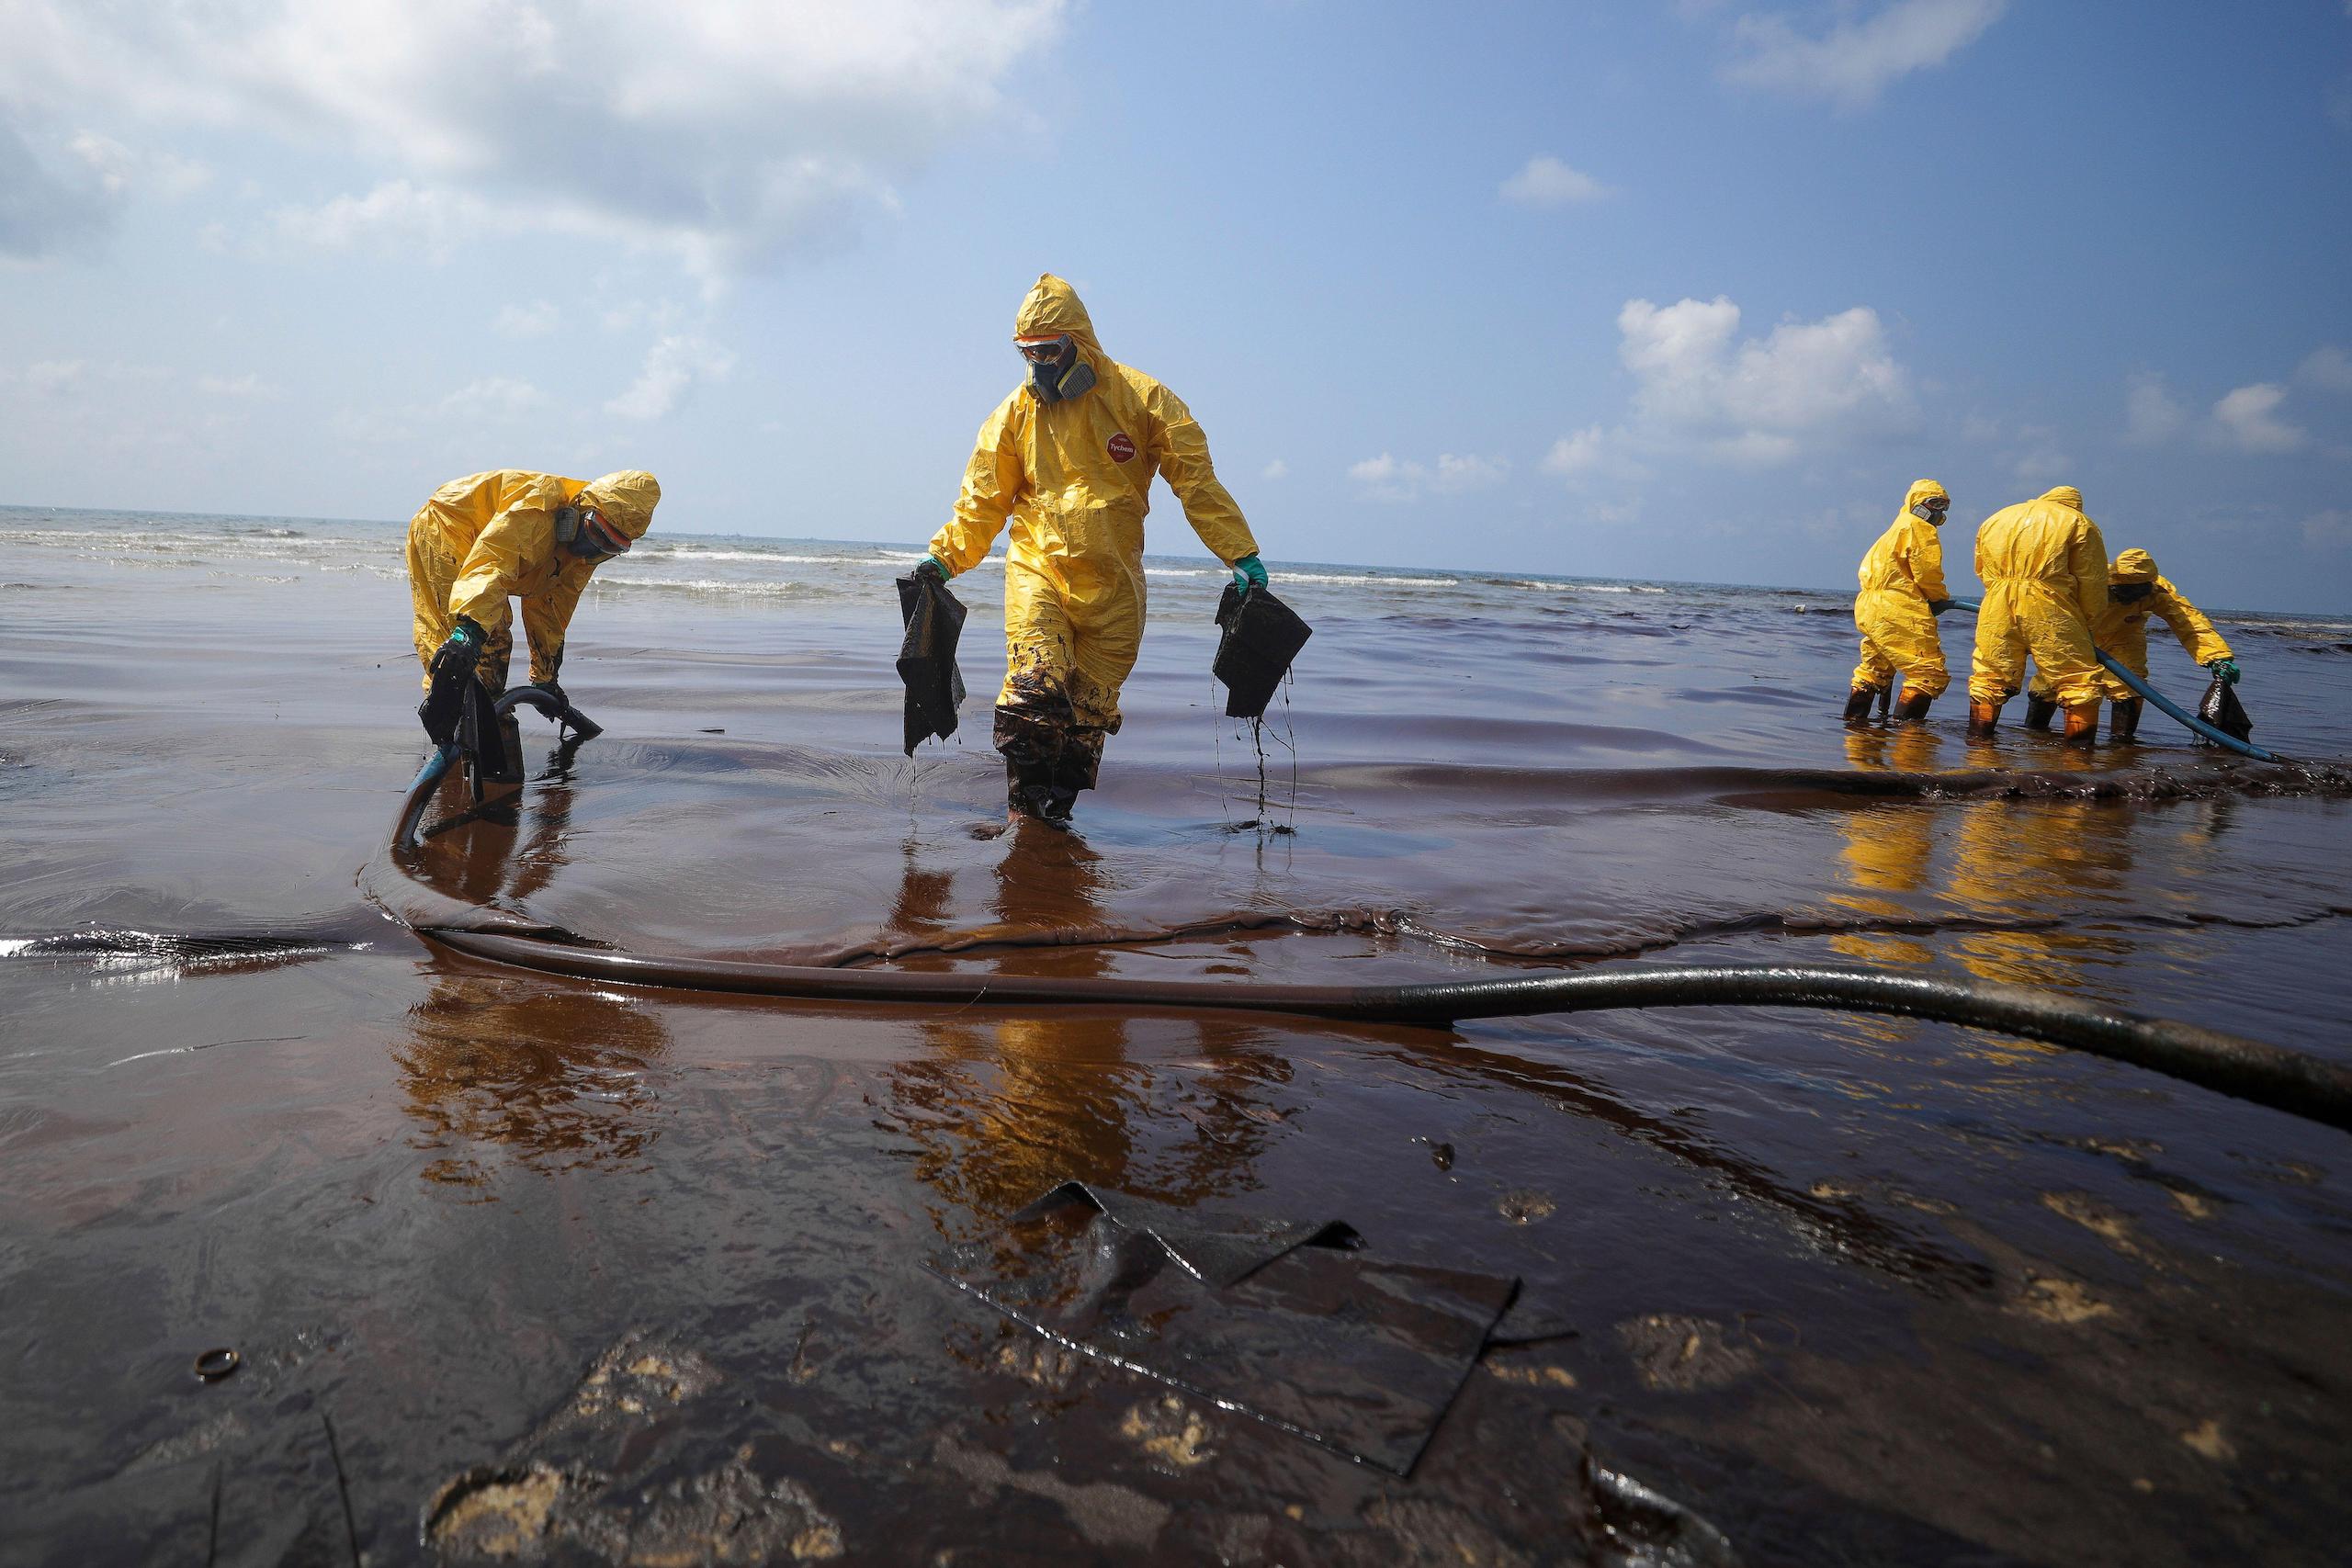 <p>A clean-up operation at Mae Ramphueng Beach, Thailand, after 47,000 tons of crude oil leaked from an undersea pipeline off the coast in January 2022 (Image: Nava Sangthong / Alamy)</p>